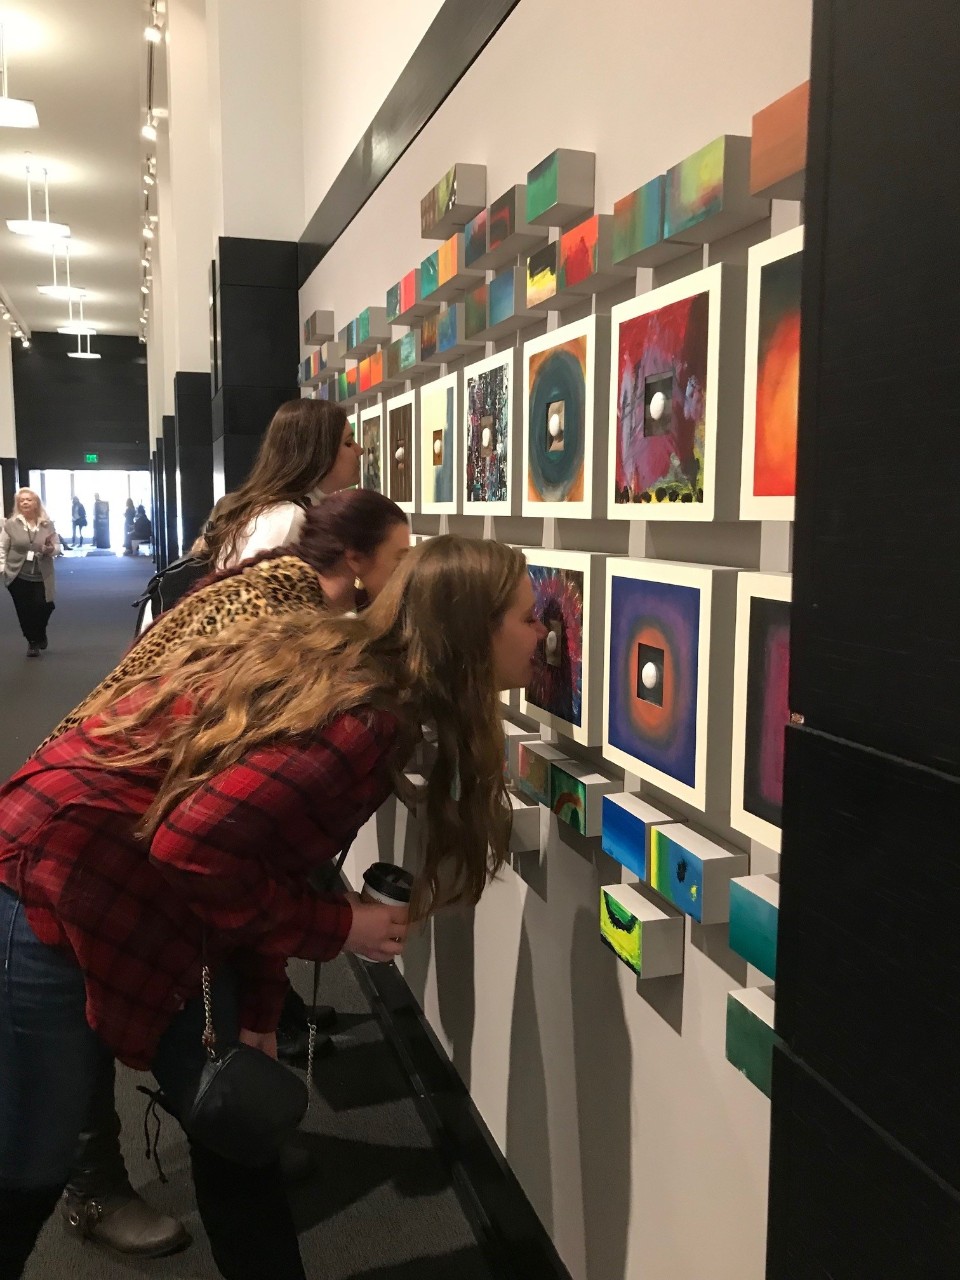 several young women lean close to a display of several colorful textile squares mounted on a wall